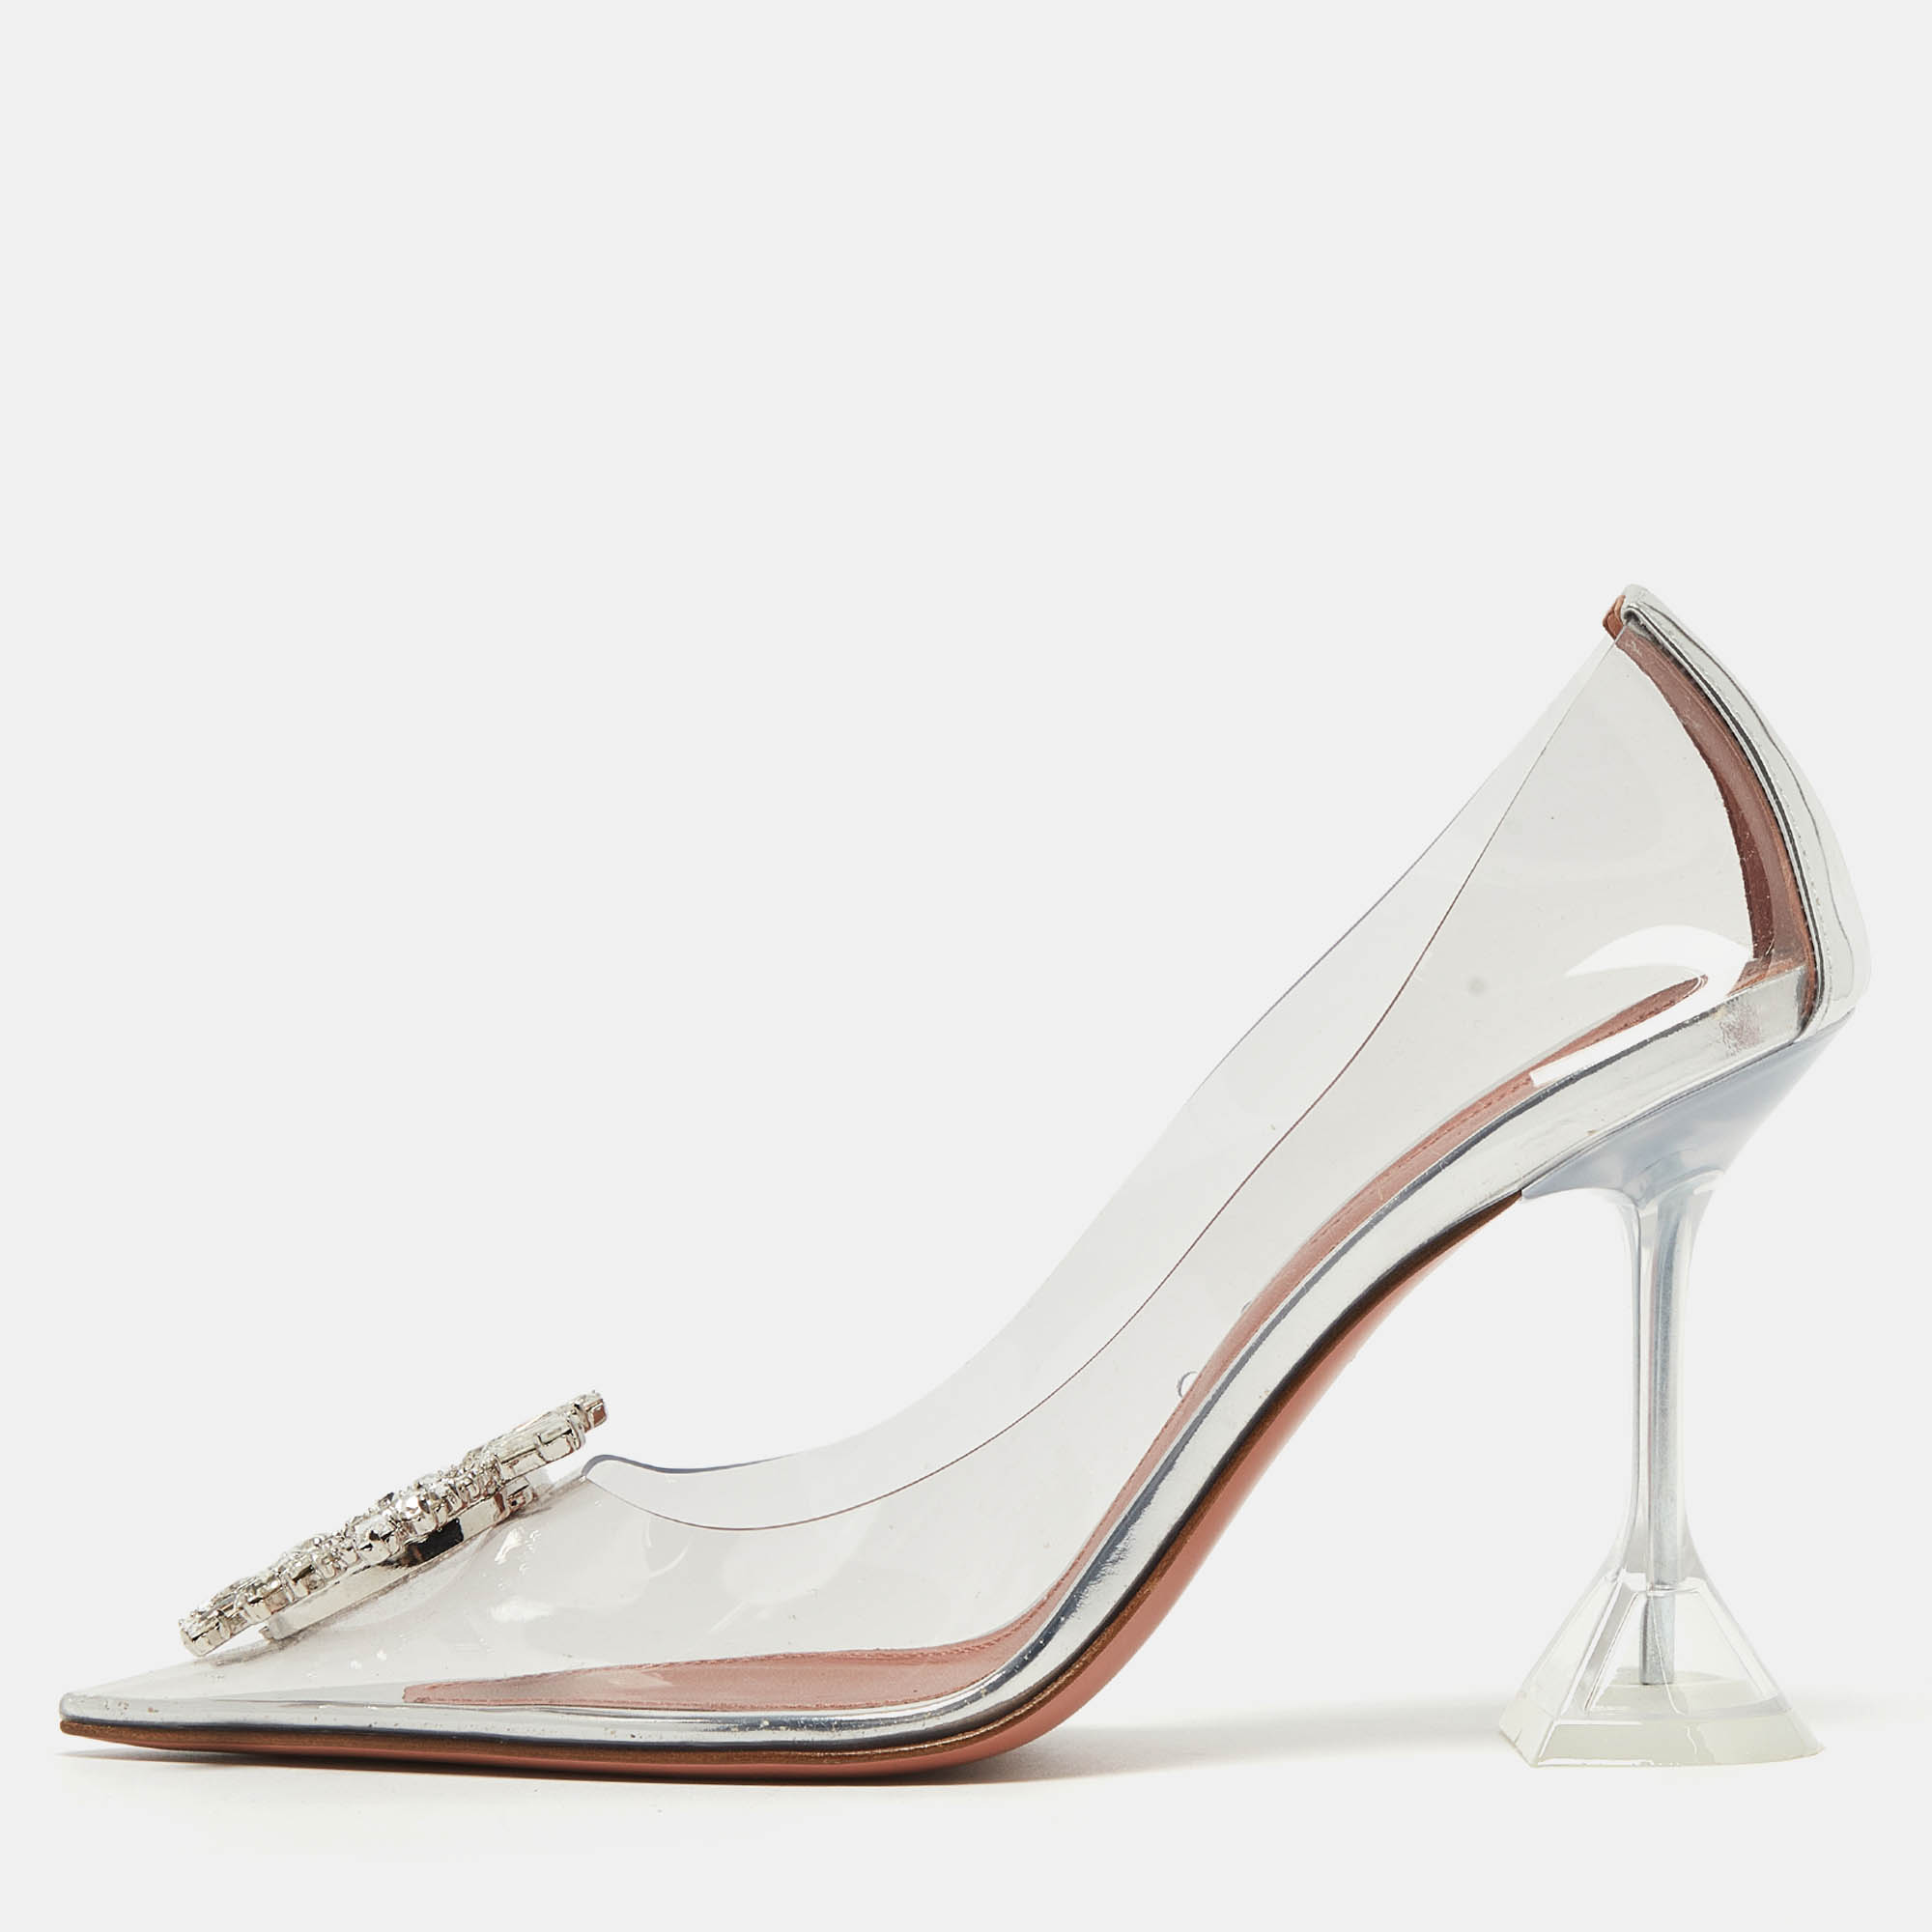 The Amina Muaddi Begum pumps are striking high heeled shoes. They feature transparent PVC uppers a pointed toe and a sculpted heel with a signature flared design. These pumps exude modern elegance combining transparency with a bold embellishment for a unique and stylish look.